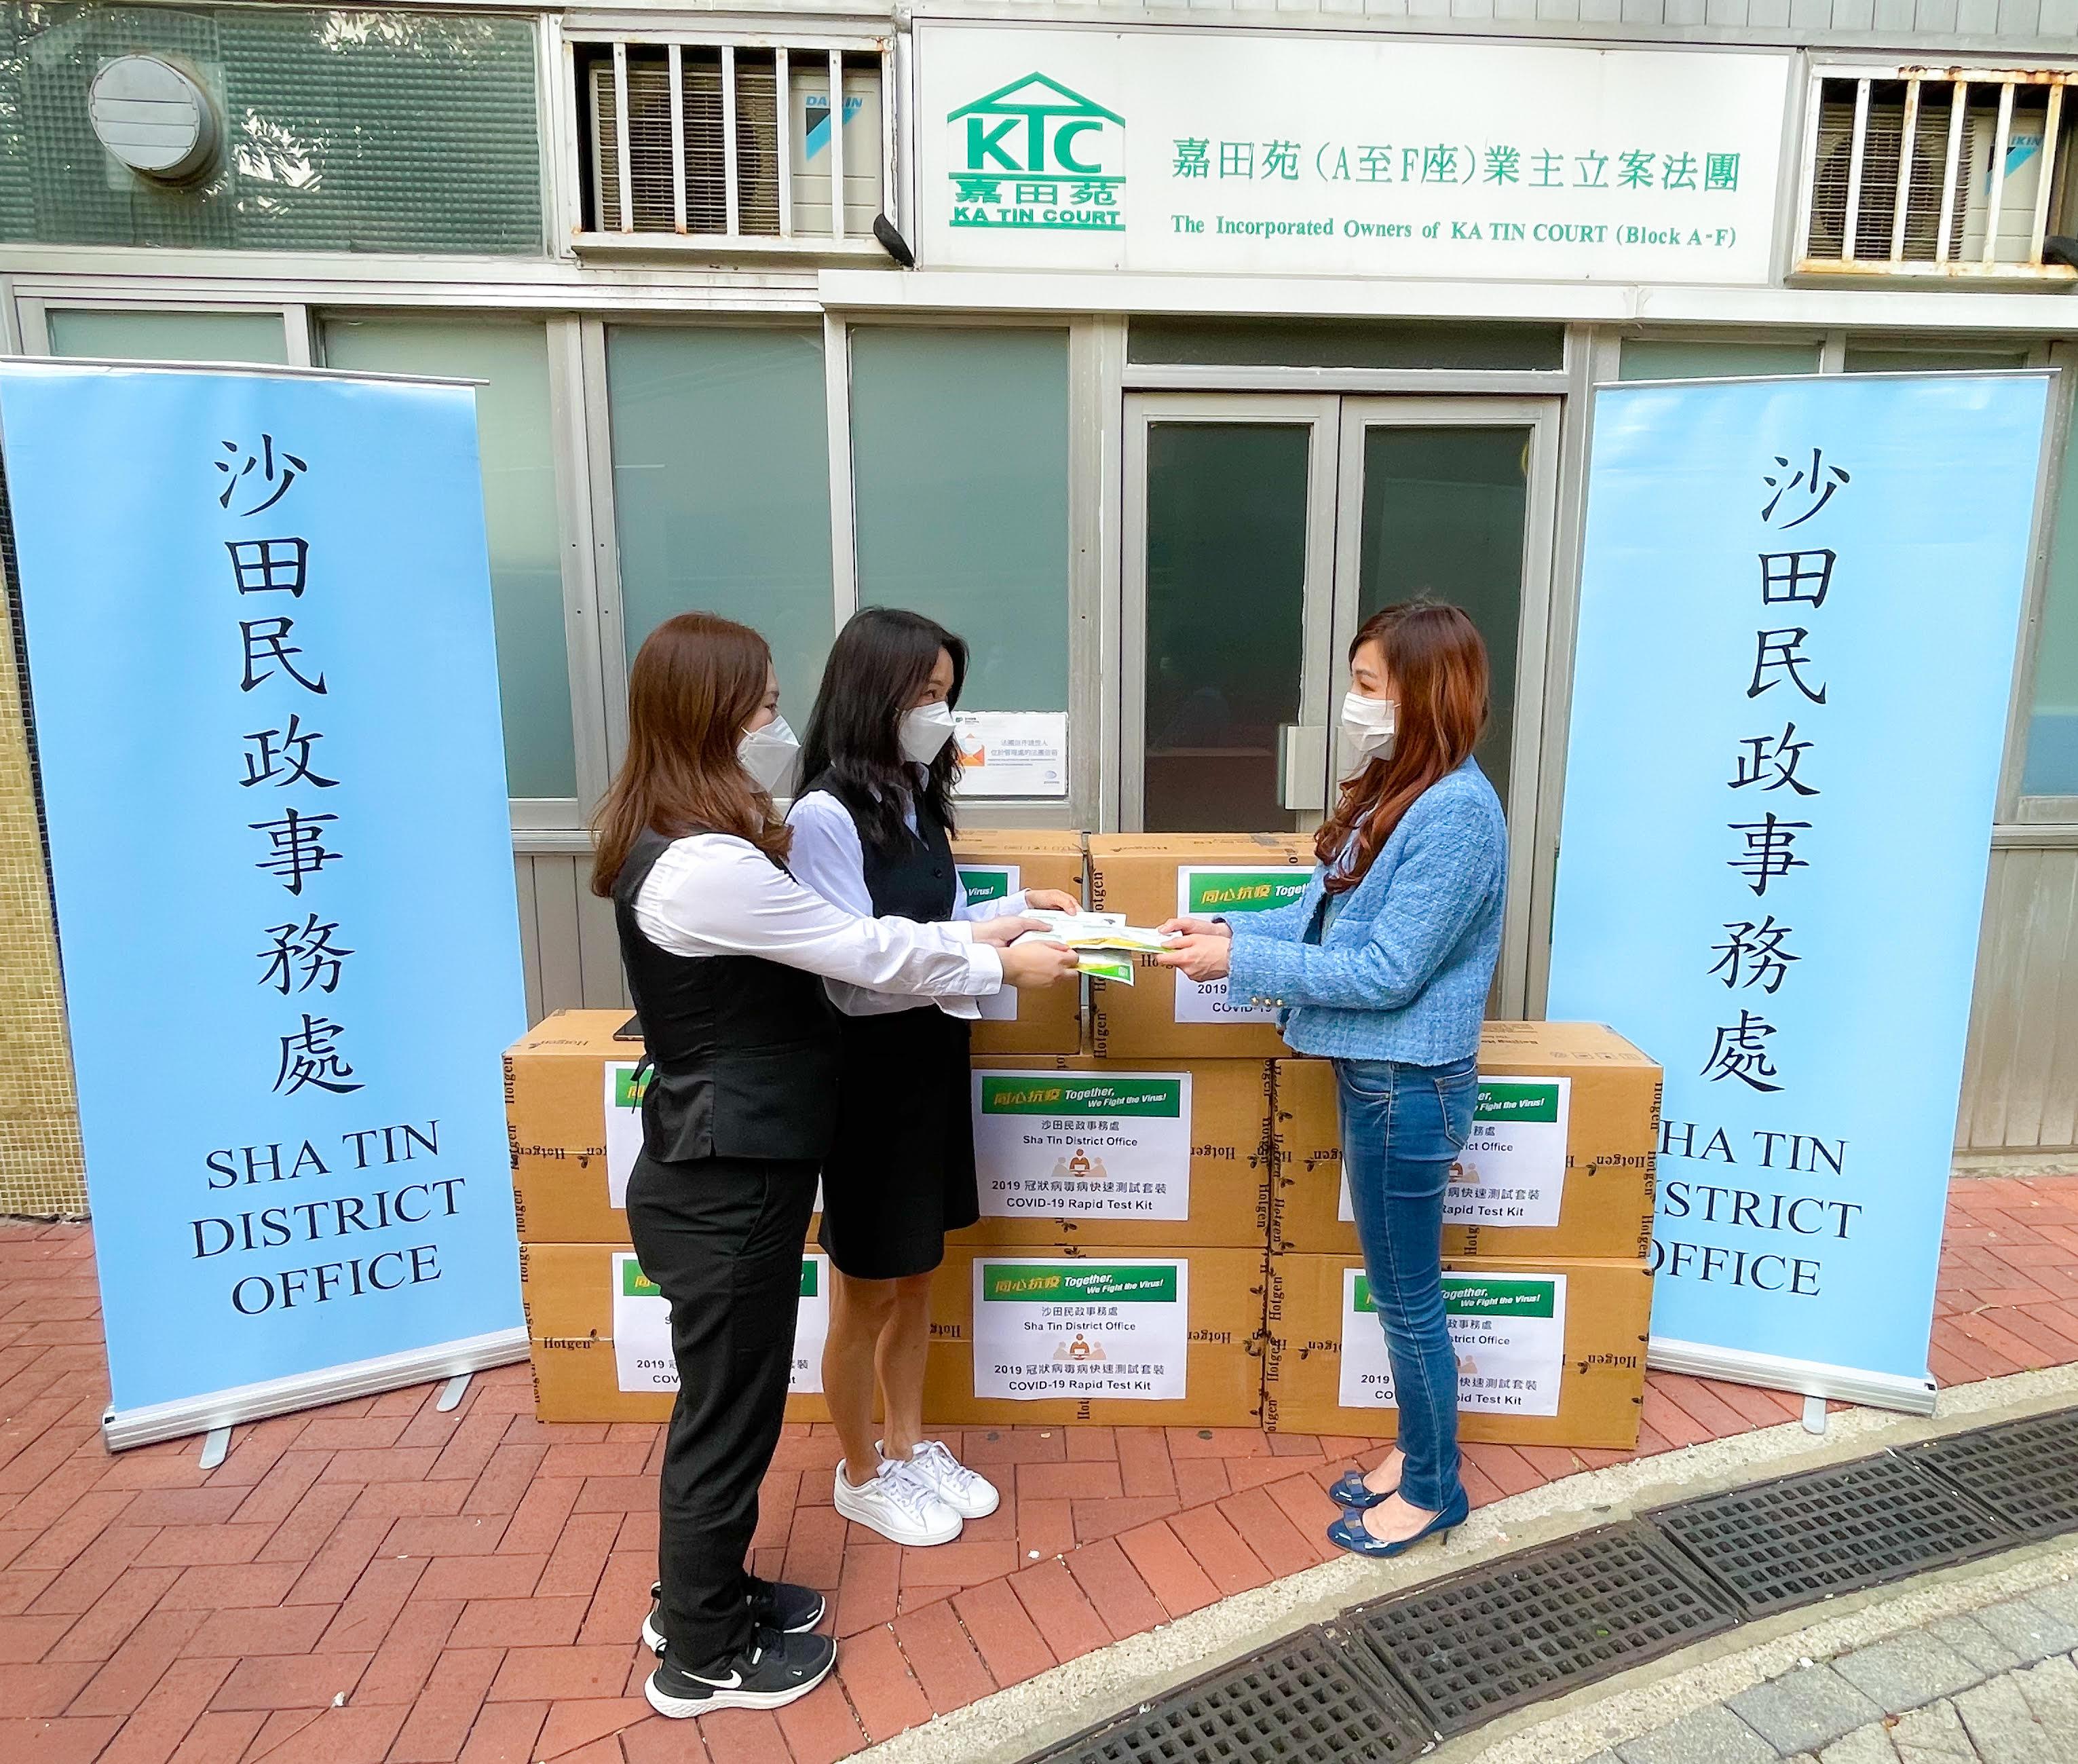 The Sha Tin District Office today (March 4) today distributed COVID-19 rapid test kits to households, cleansing workers and property management staff living and working in Ka Tin Court for voluntary testing through the property management company.